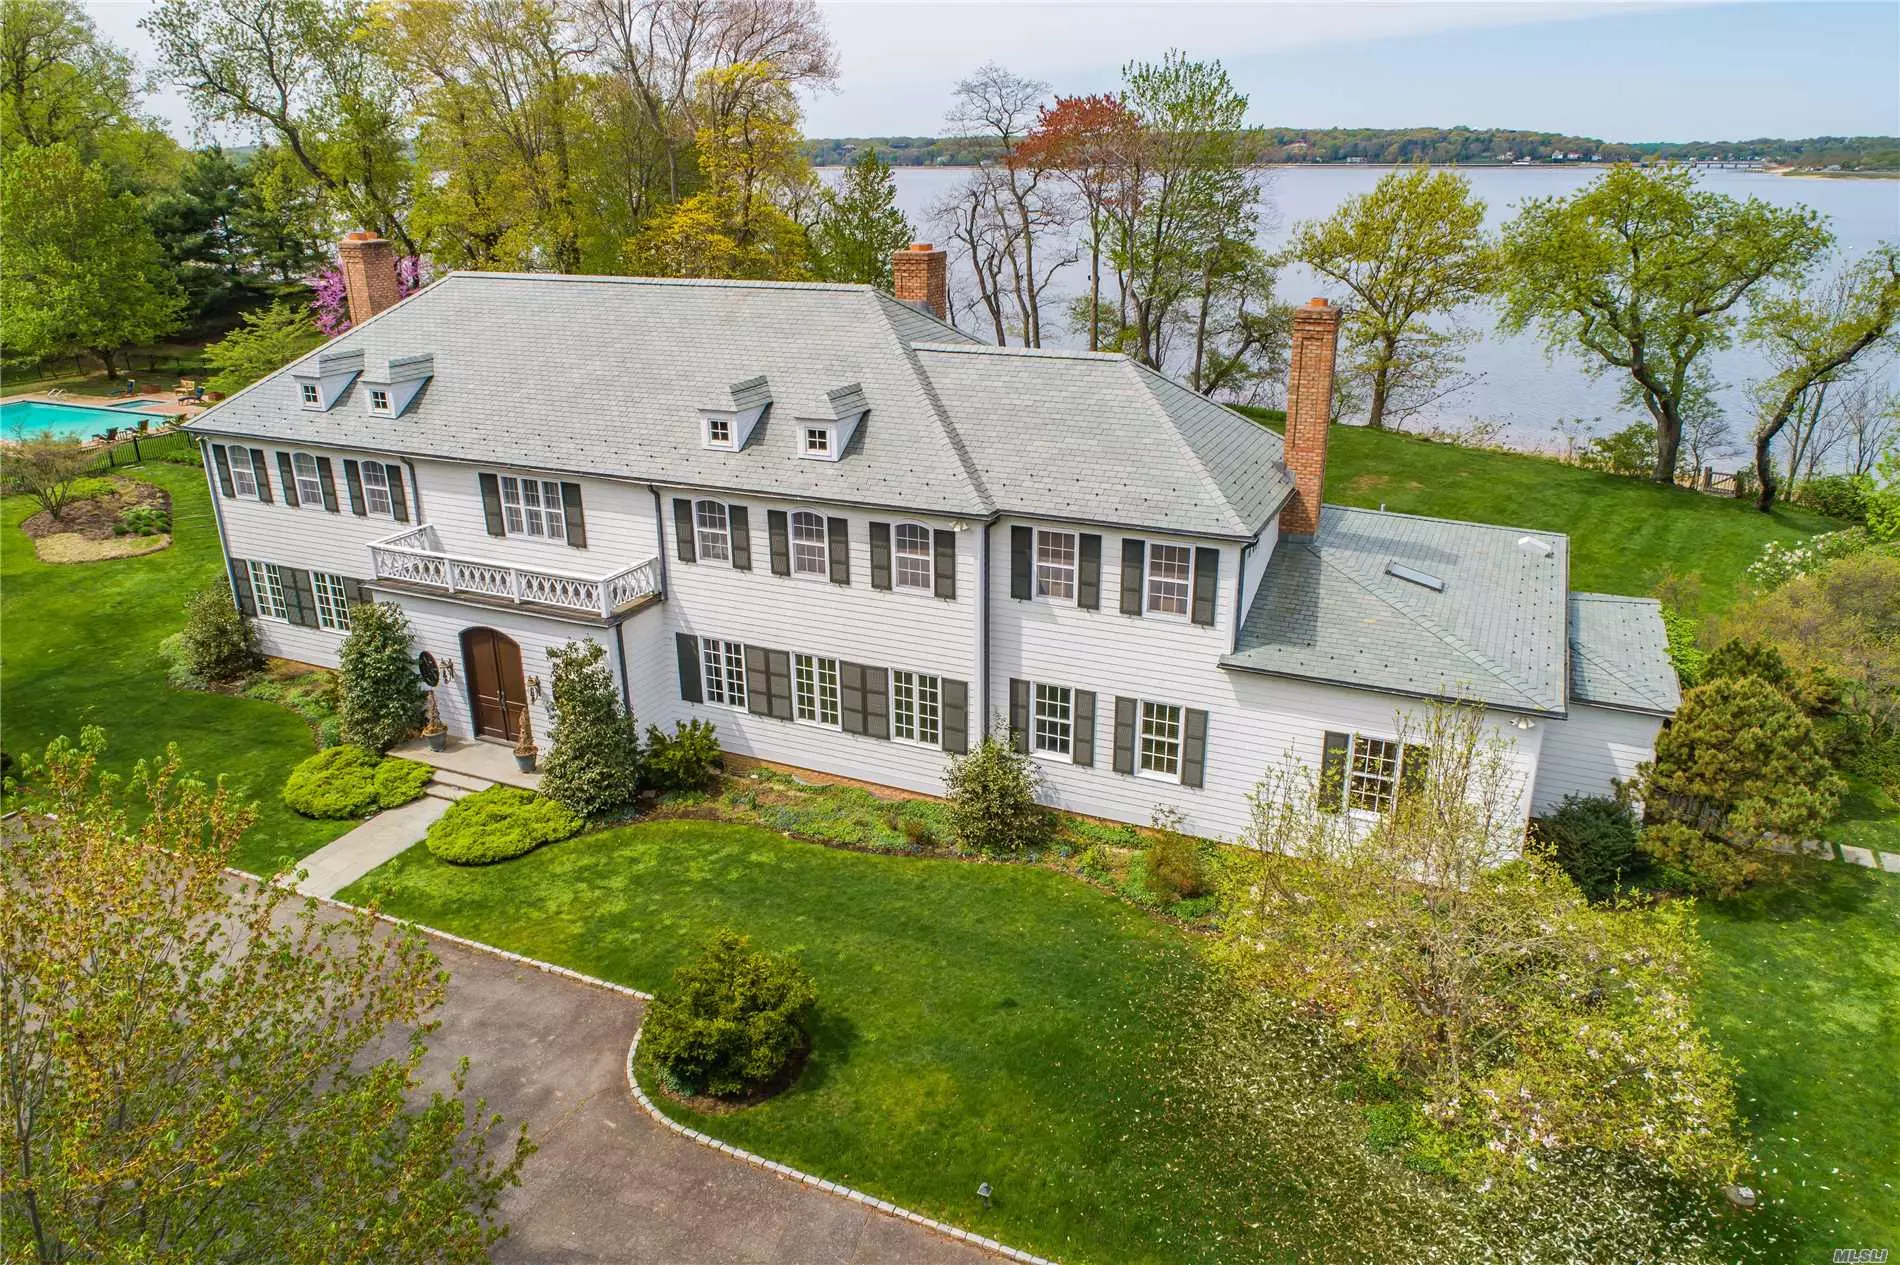 New Price. Breathtaking Western Water Views And Sunsets Plus 394&rsquo; Of Sandy Beach. Elegance Abounds In This Custom Colonial With 12&rsquo; Ceilings, Tall Arched Doorways And Stunning Mill Work. Every Room Captures Magical Views Of Ob Harbor. Incredible Details Include Curved Stairway, Maple Paneled Library, Floor-To-Ceiling Windows In Sunroom, 4 Fpls, Mahogany Doors, Chippendale-Style Railings On Balconies, Lighted Steps To Beach, Plus Htd Pool & Pool House.Floating Dock Allowed. Taxes Being Grieved. #virtualopenhouse https://danielgale.zoom.us/j/97408382267 05/03/2020 2:00 PM-2:30 PM